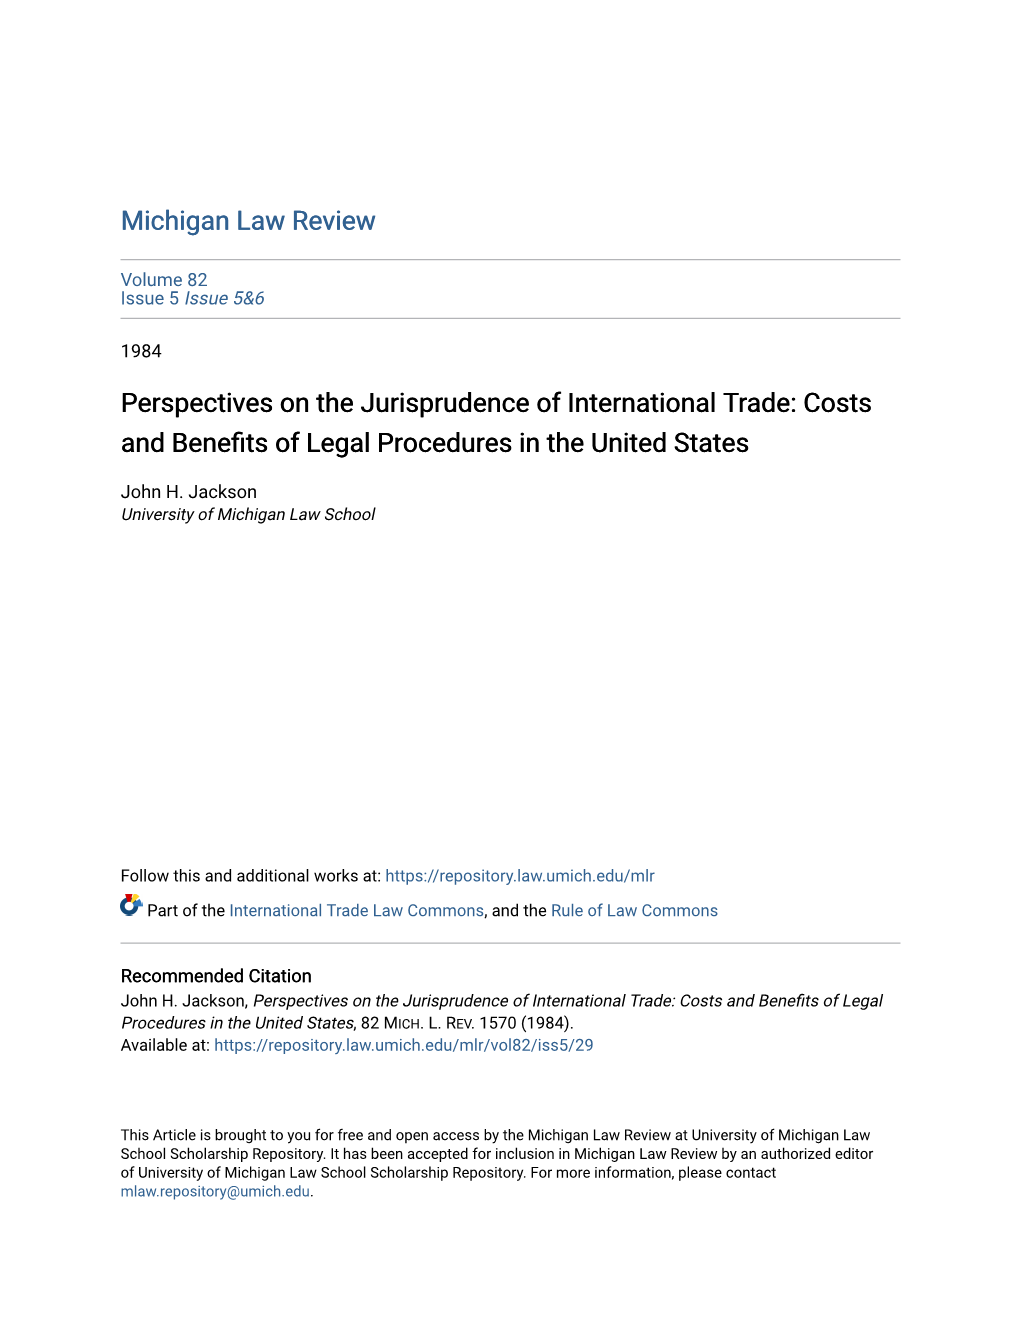 Perspectives on the Jurisprudence of International Trade: Costs and Benefits of Legal Procedures in the United States